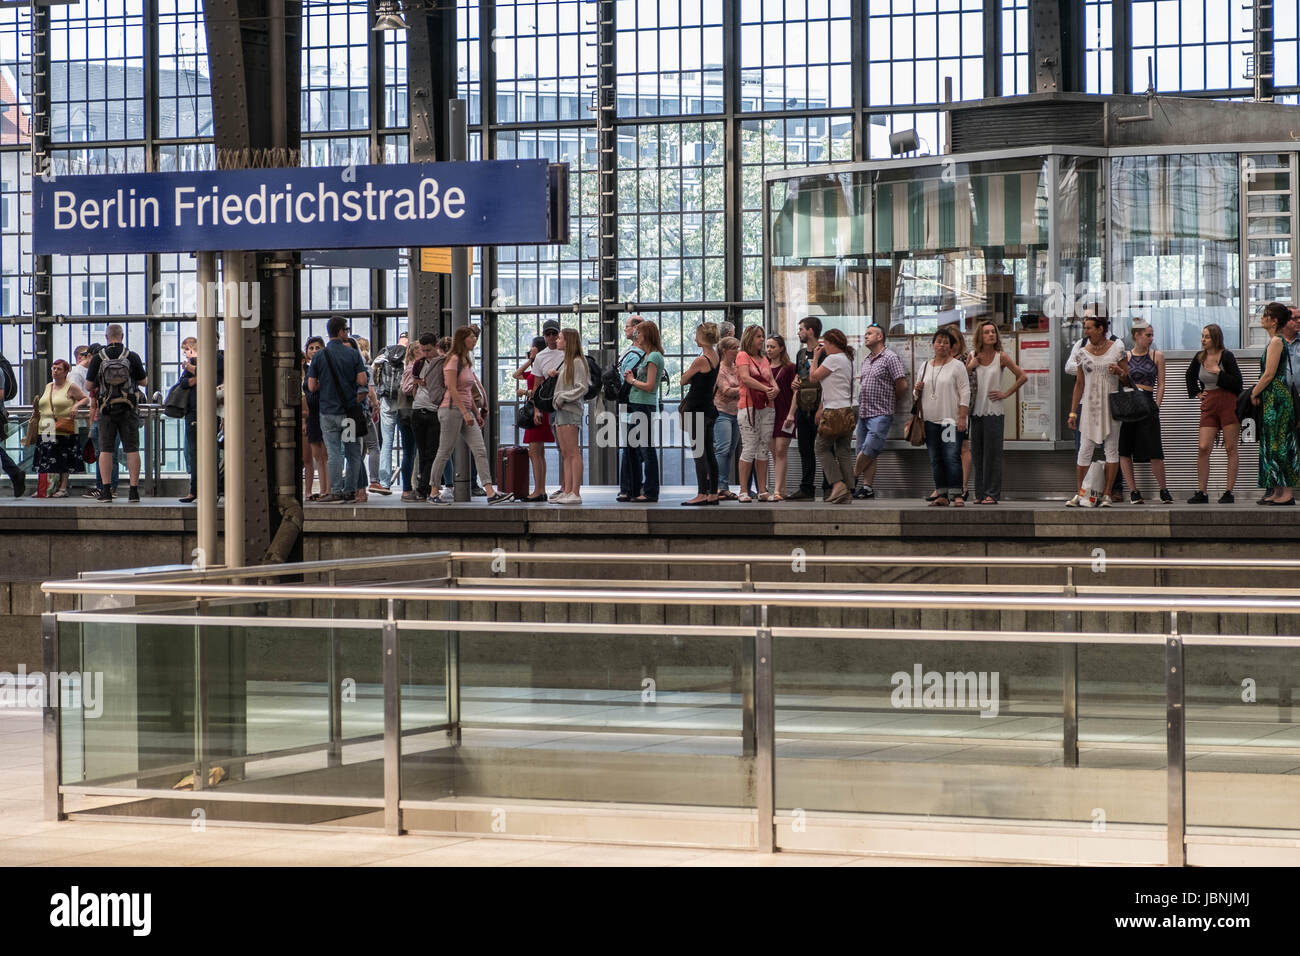 Berlin, Germany - june 9, 2017: People standing  on platform and waiting for S-Bahn train station Berlin Friedrichstrasse Stock Photo